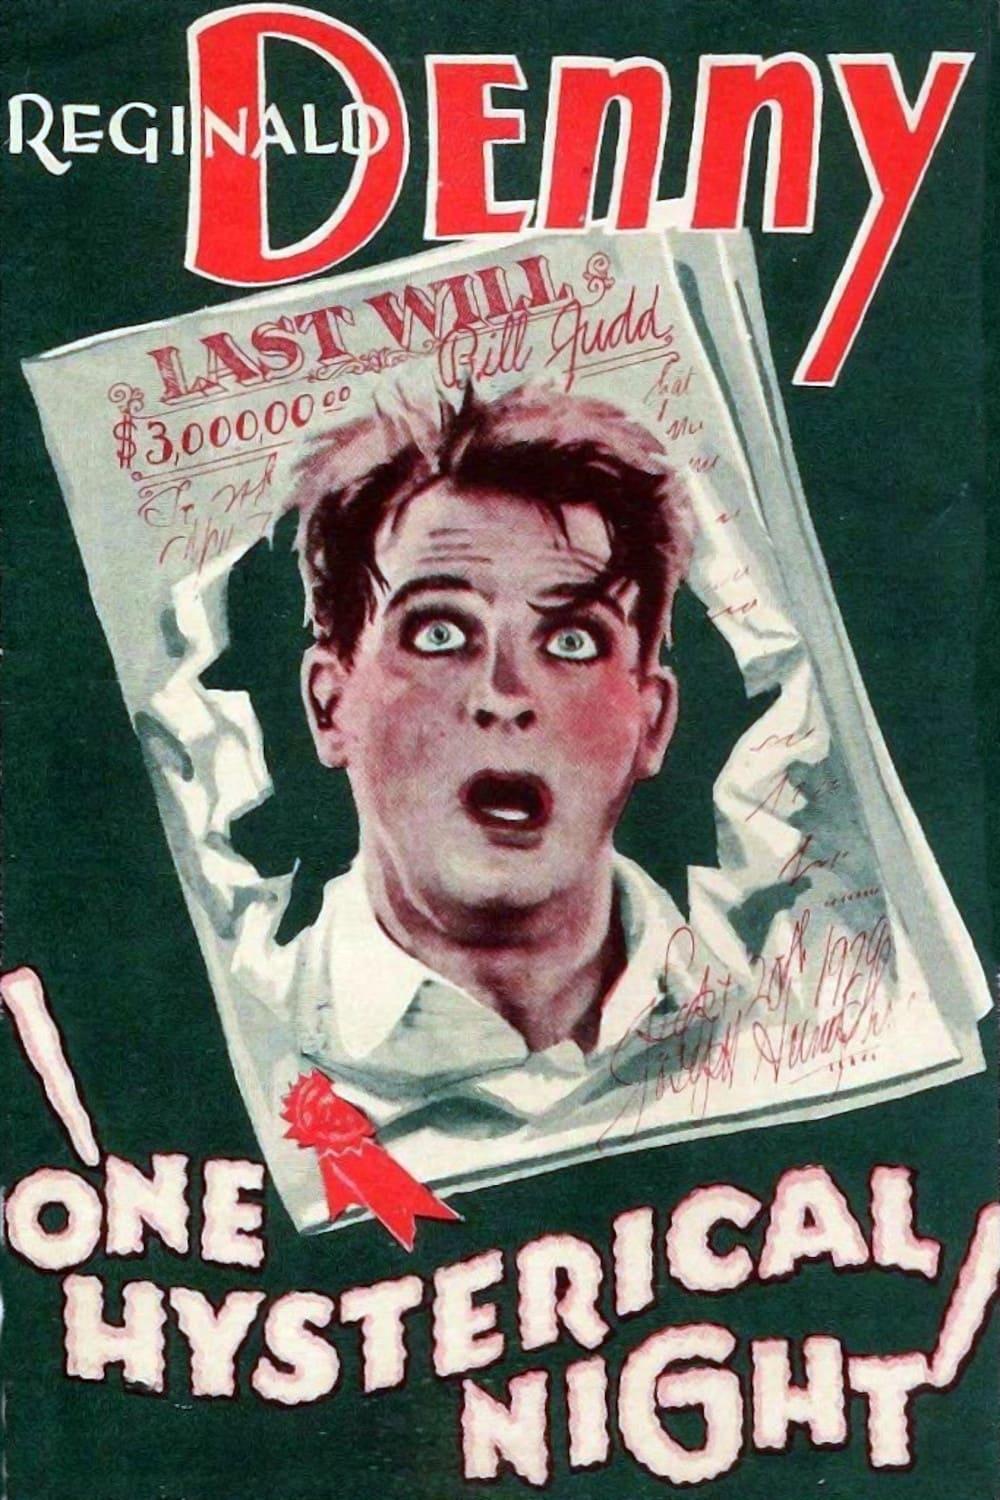 One Hysterical Night poster